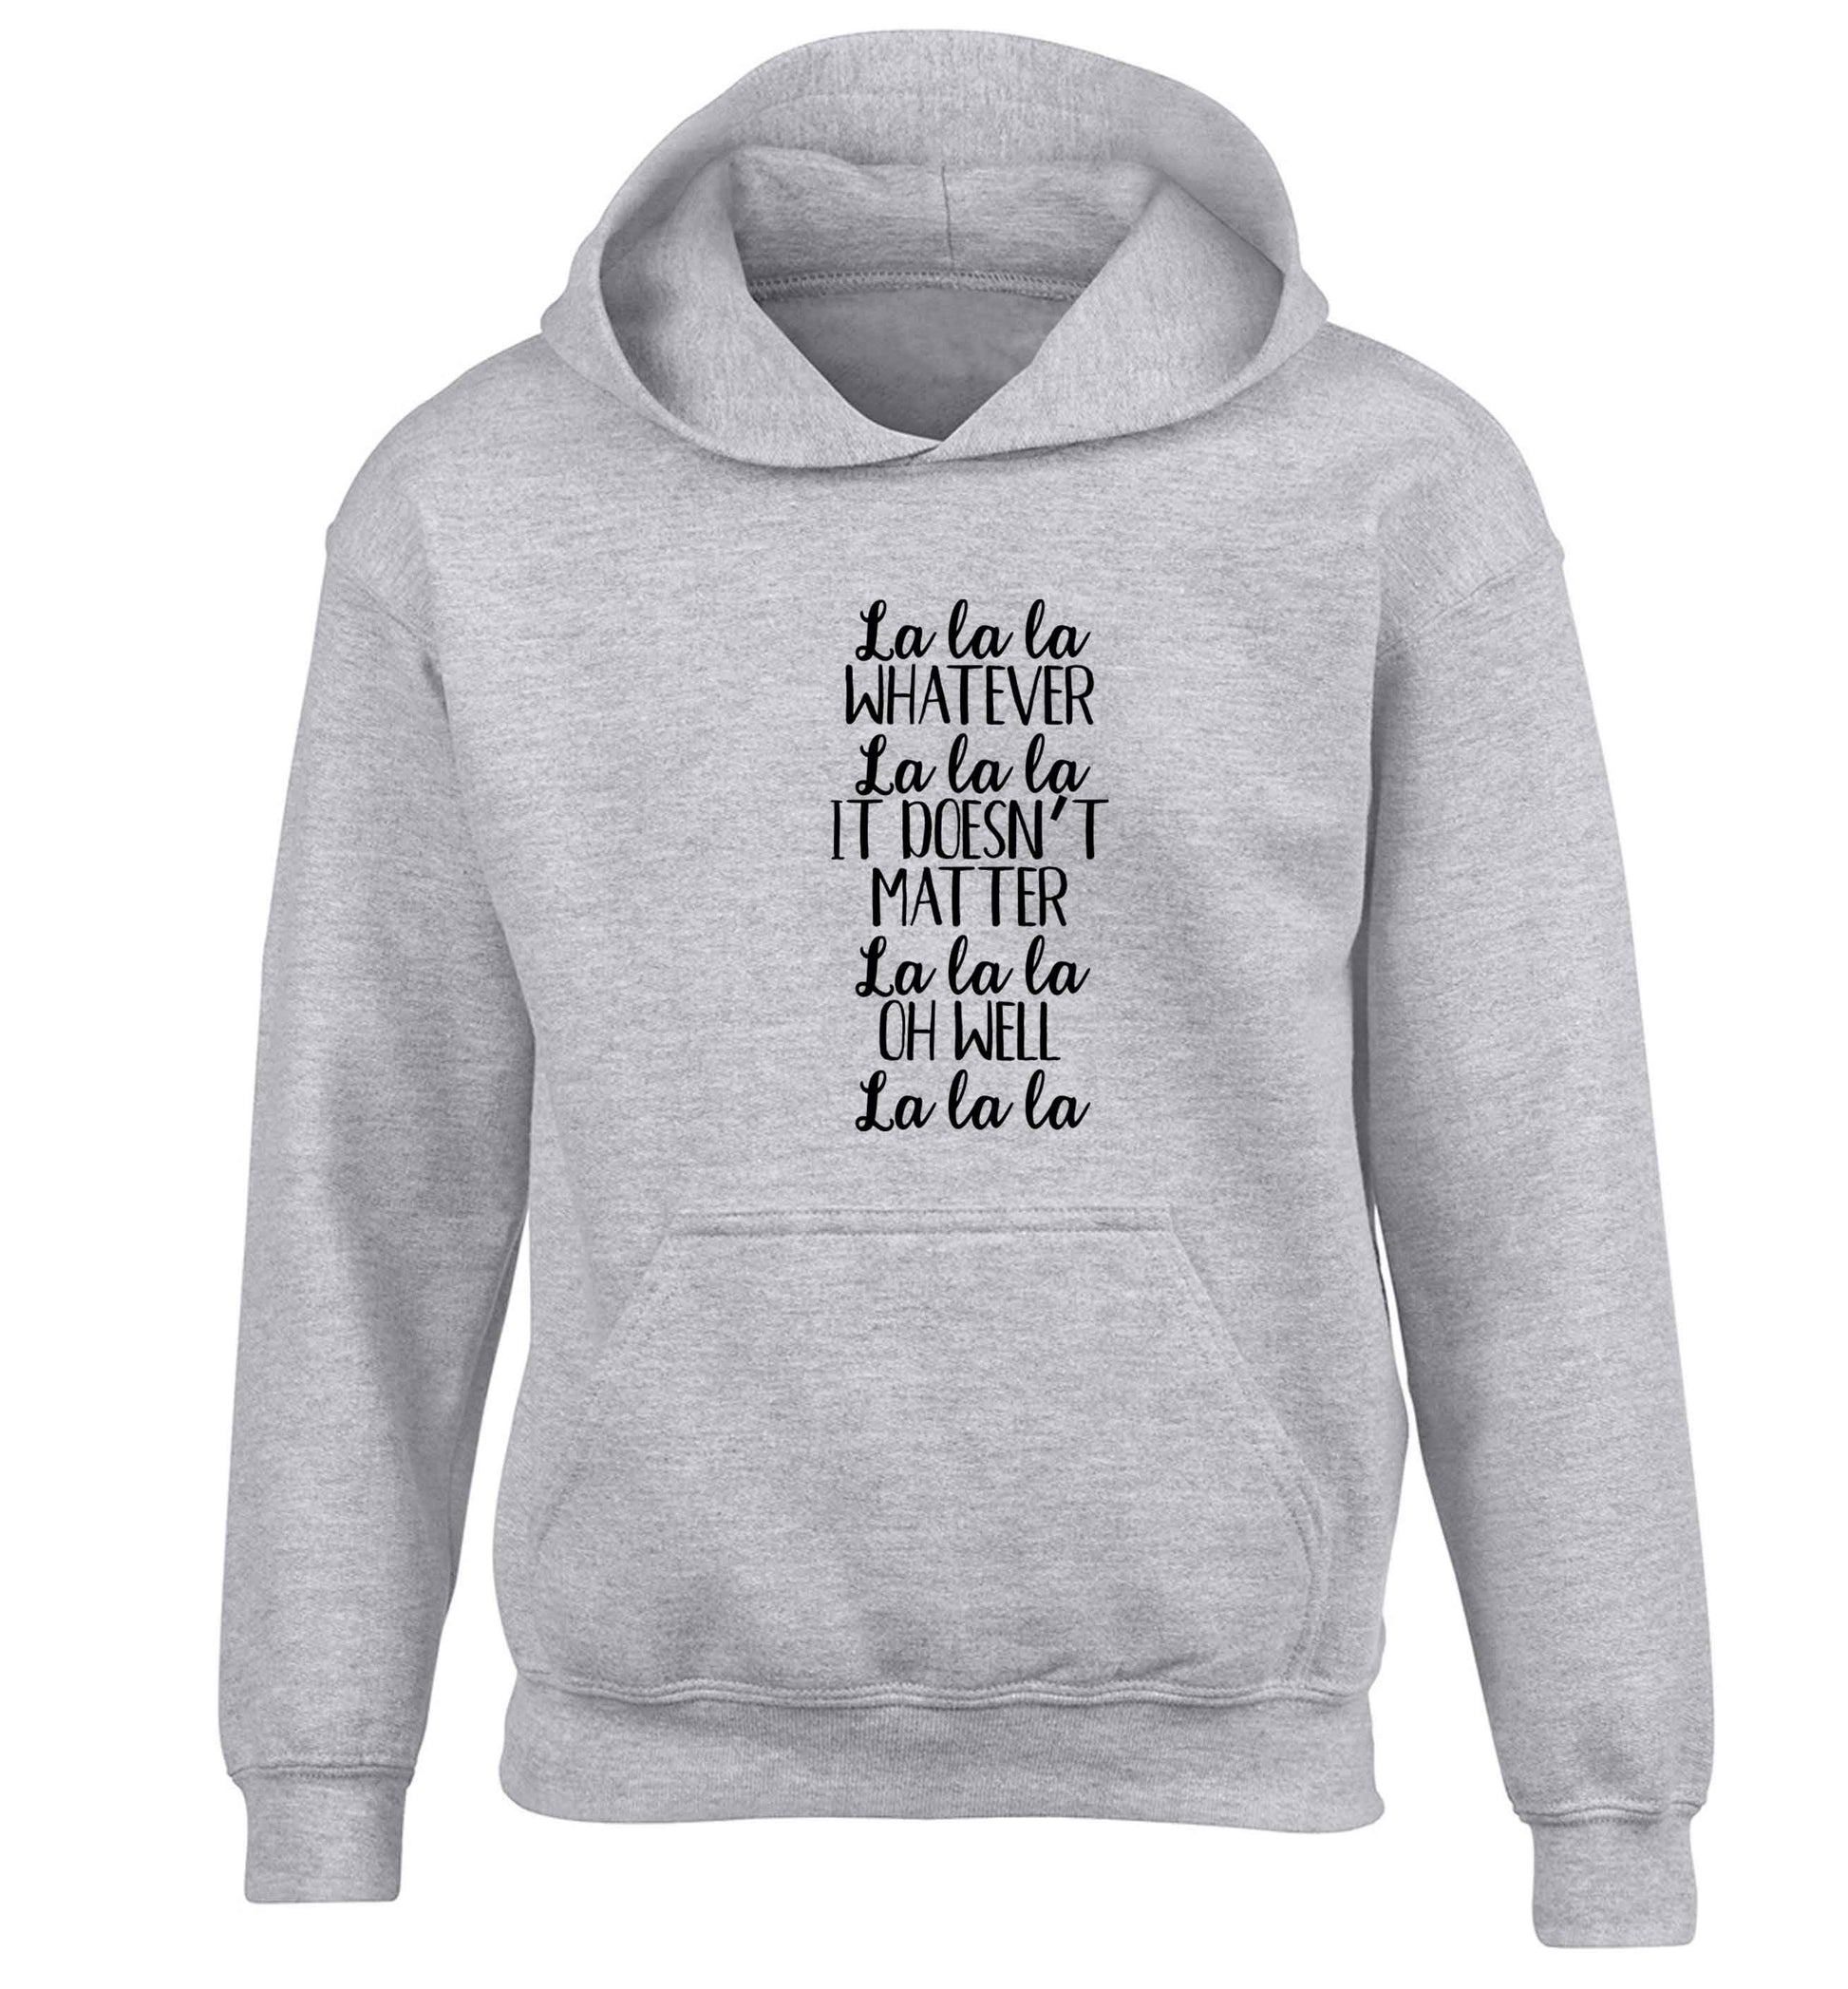 Viral song lyrics - check! Gen z babies where you at? children's grey hoodie 12-13 Years